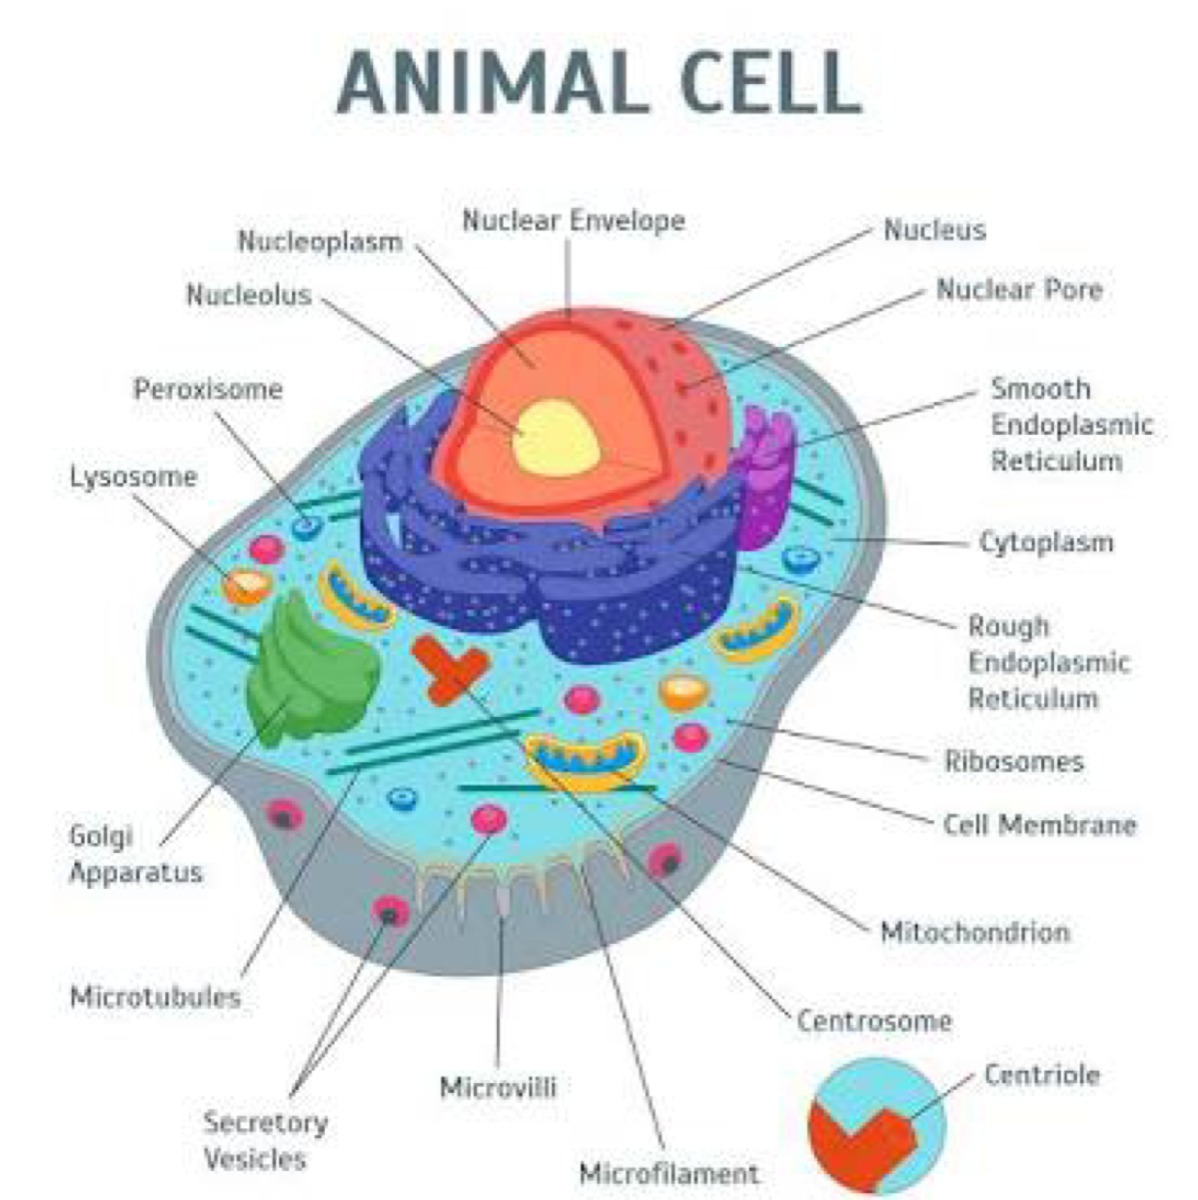 Diagram Of An Animal Cell Draw A Diagram Of A Animal Cell And Label At Least 8 Important